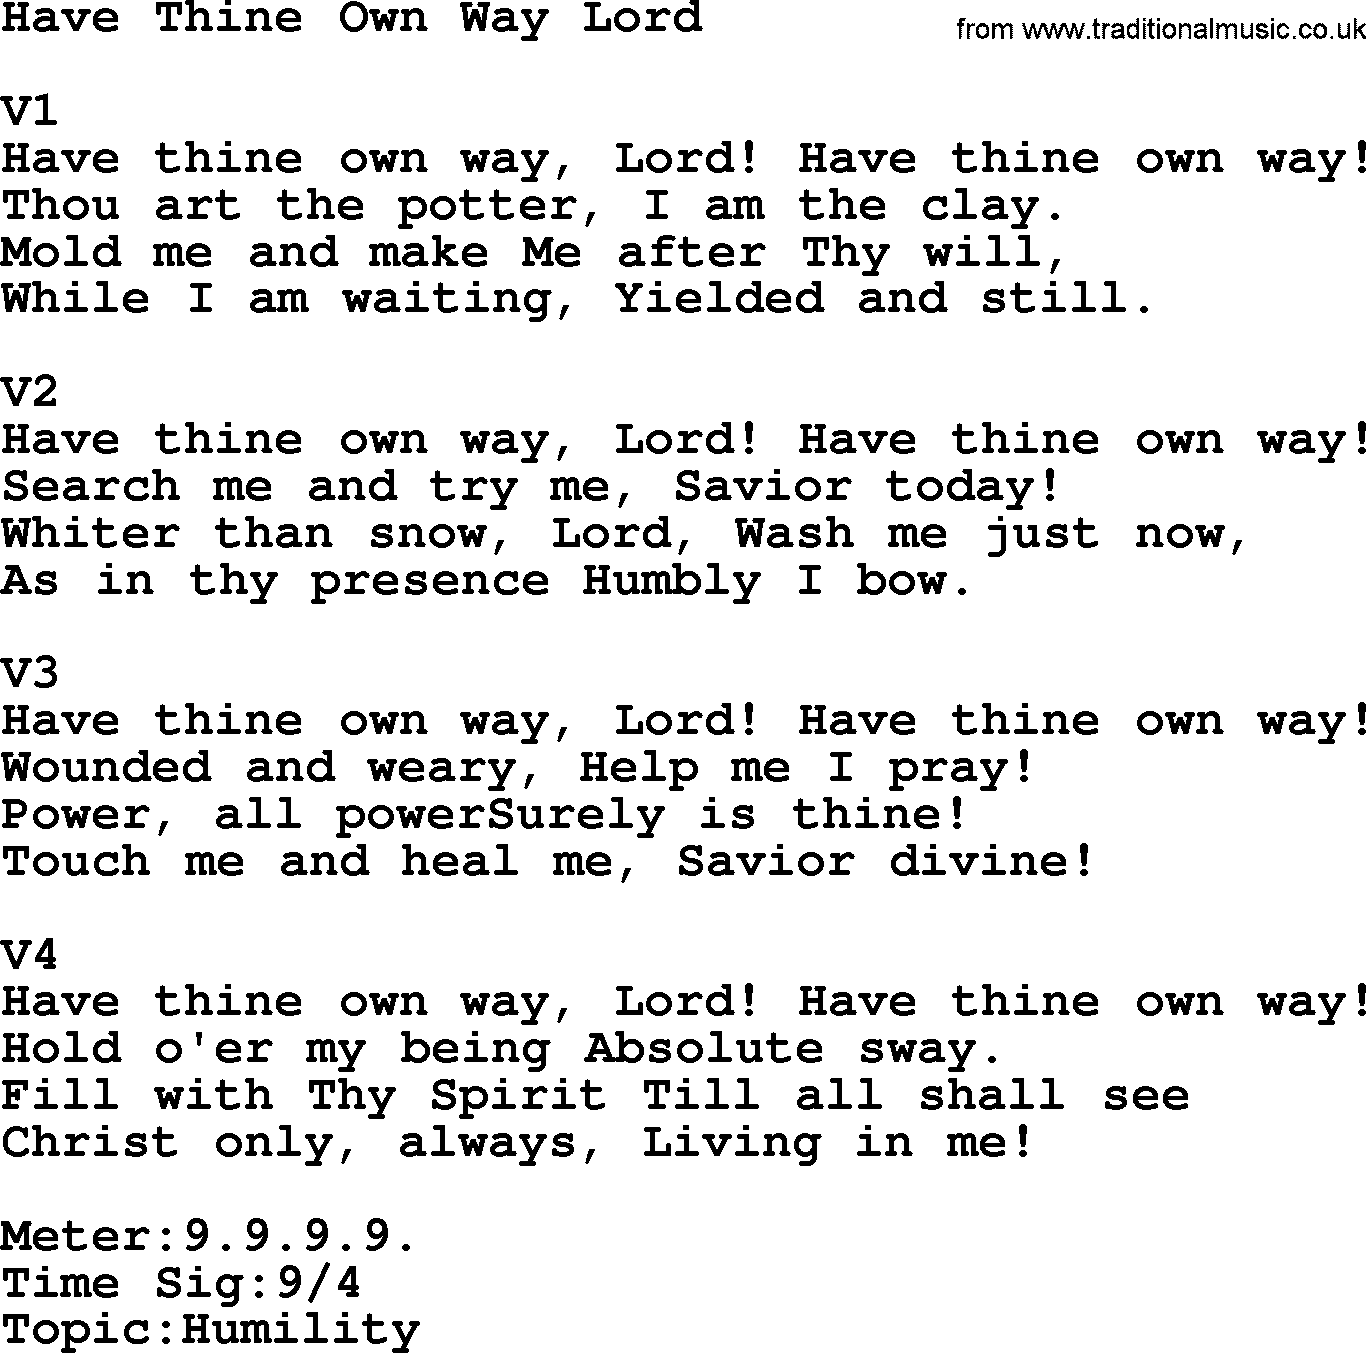 Adventist Hynms collection, Hymn: Have Thine Own Way Lord, lyrics with PDF